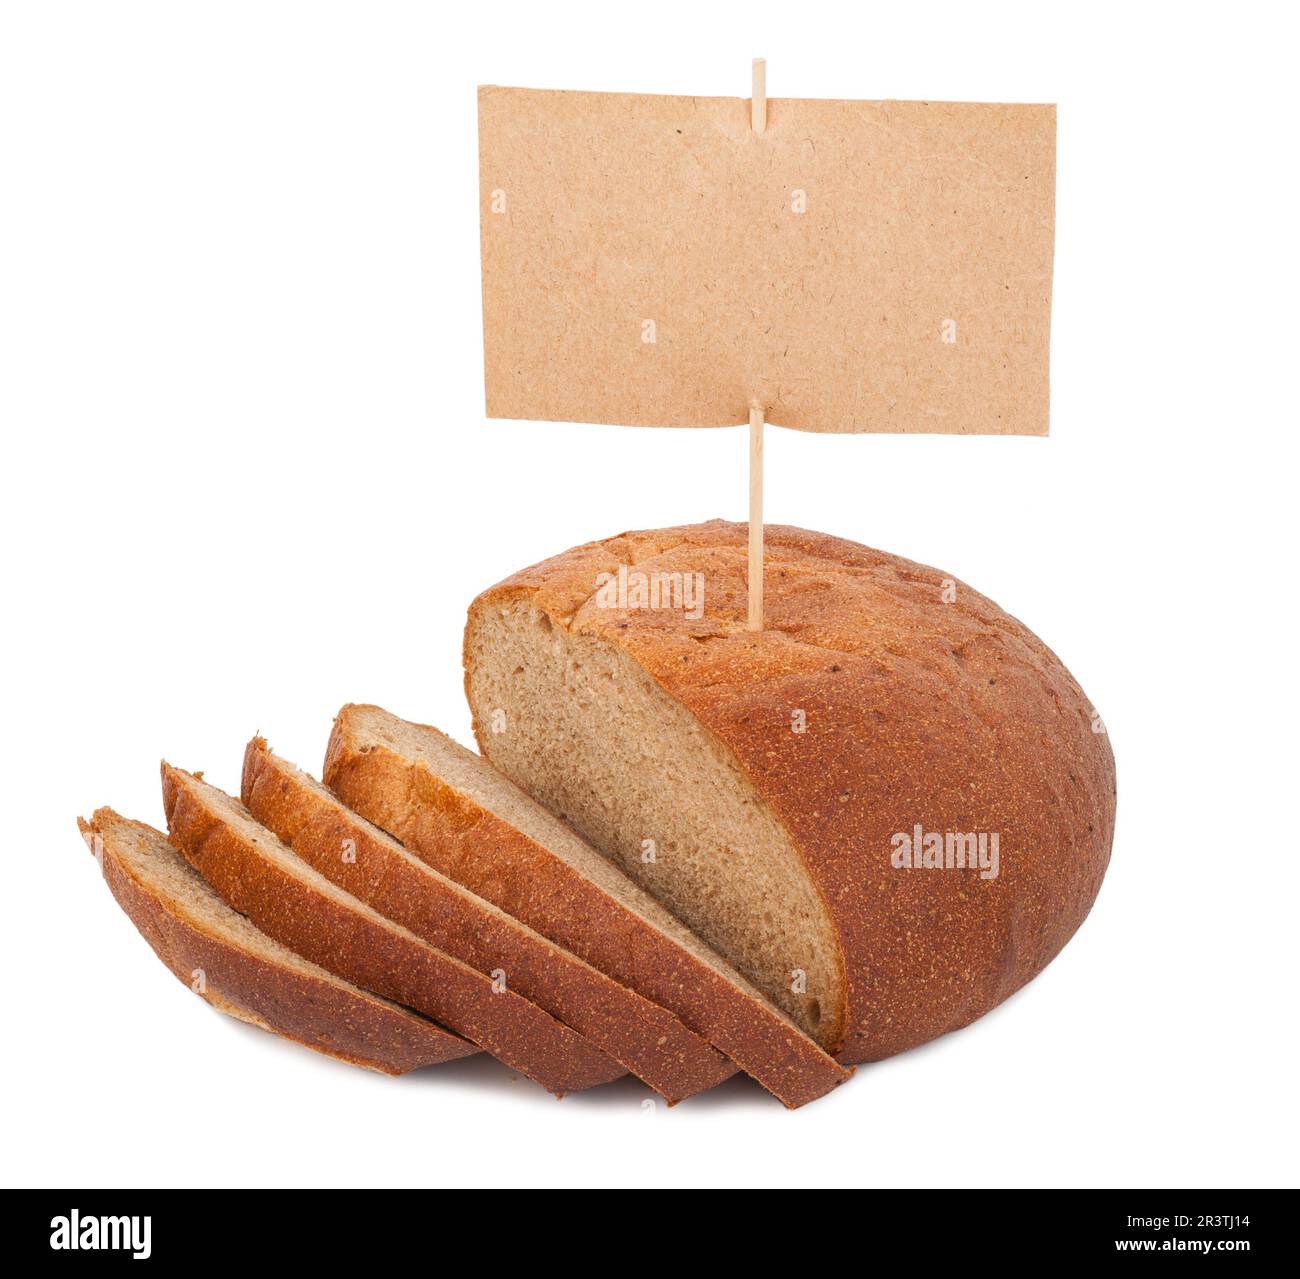 Bread with price tag Stock Photo